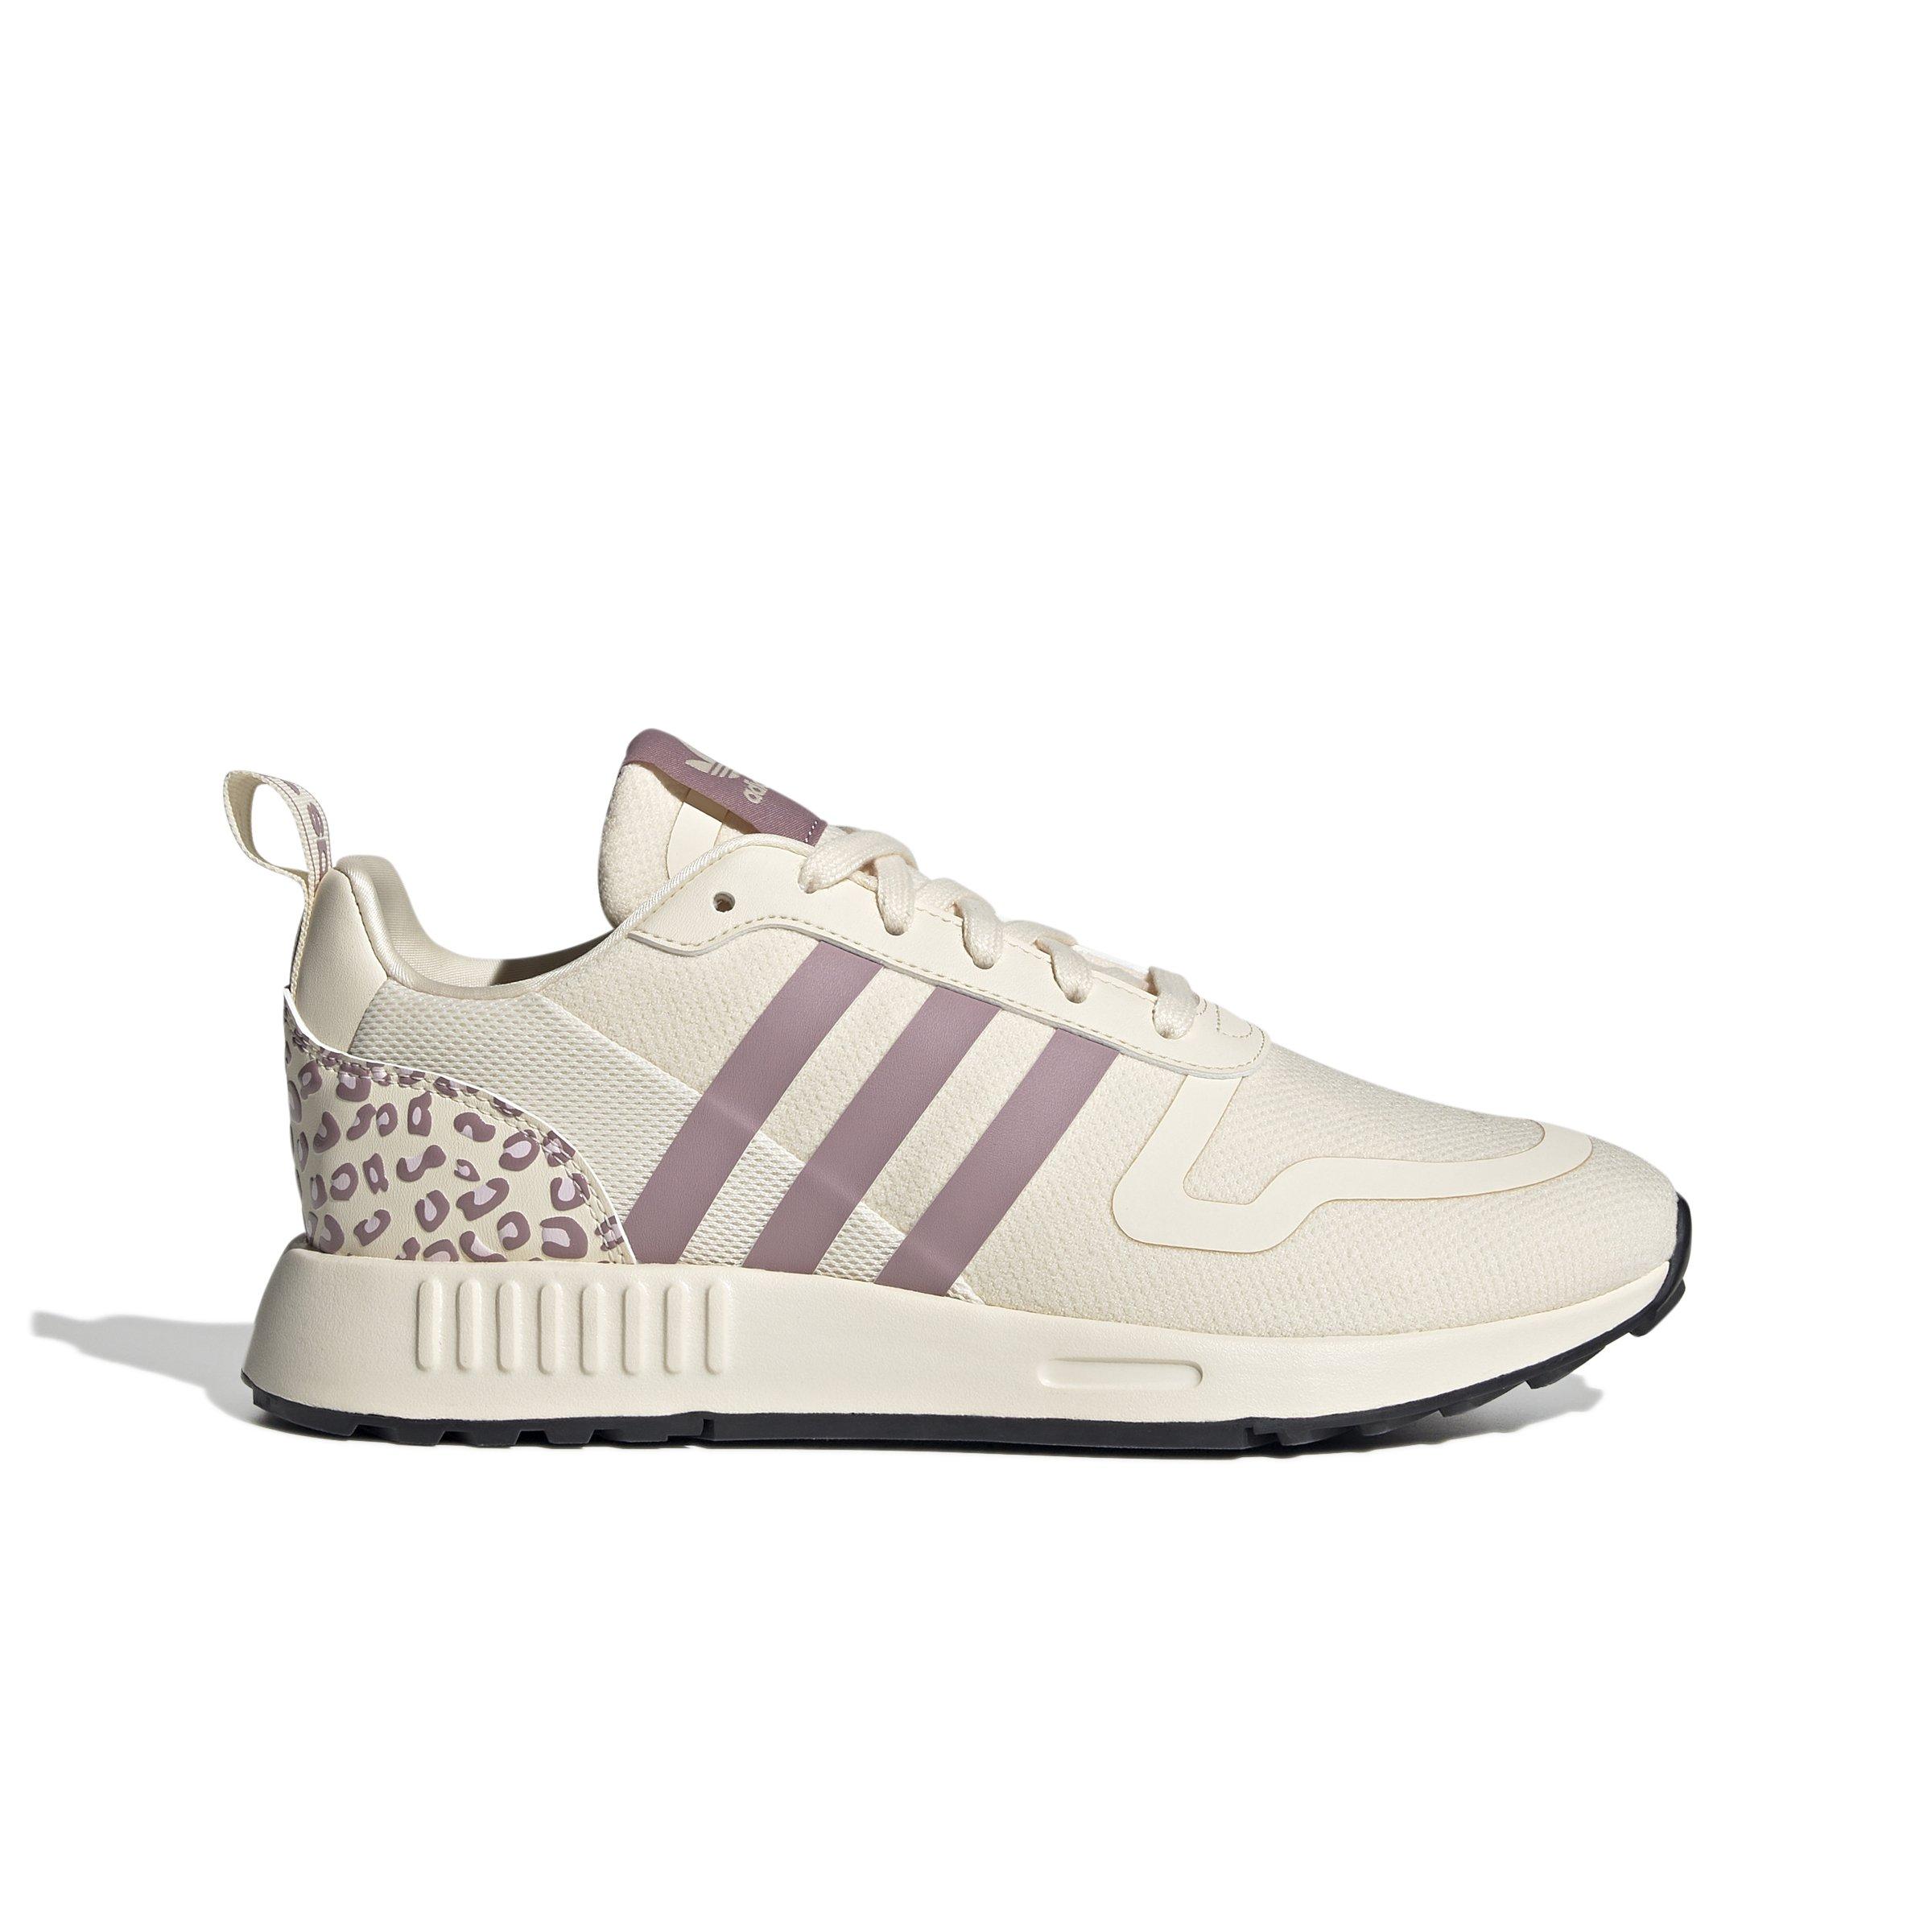 Adidas Originals Ozelia Trainers In Off White With Animal Print